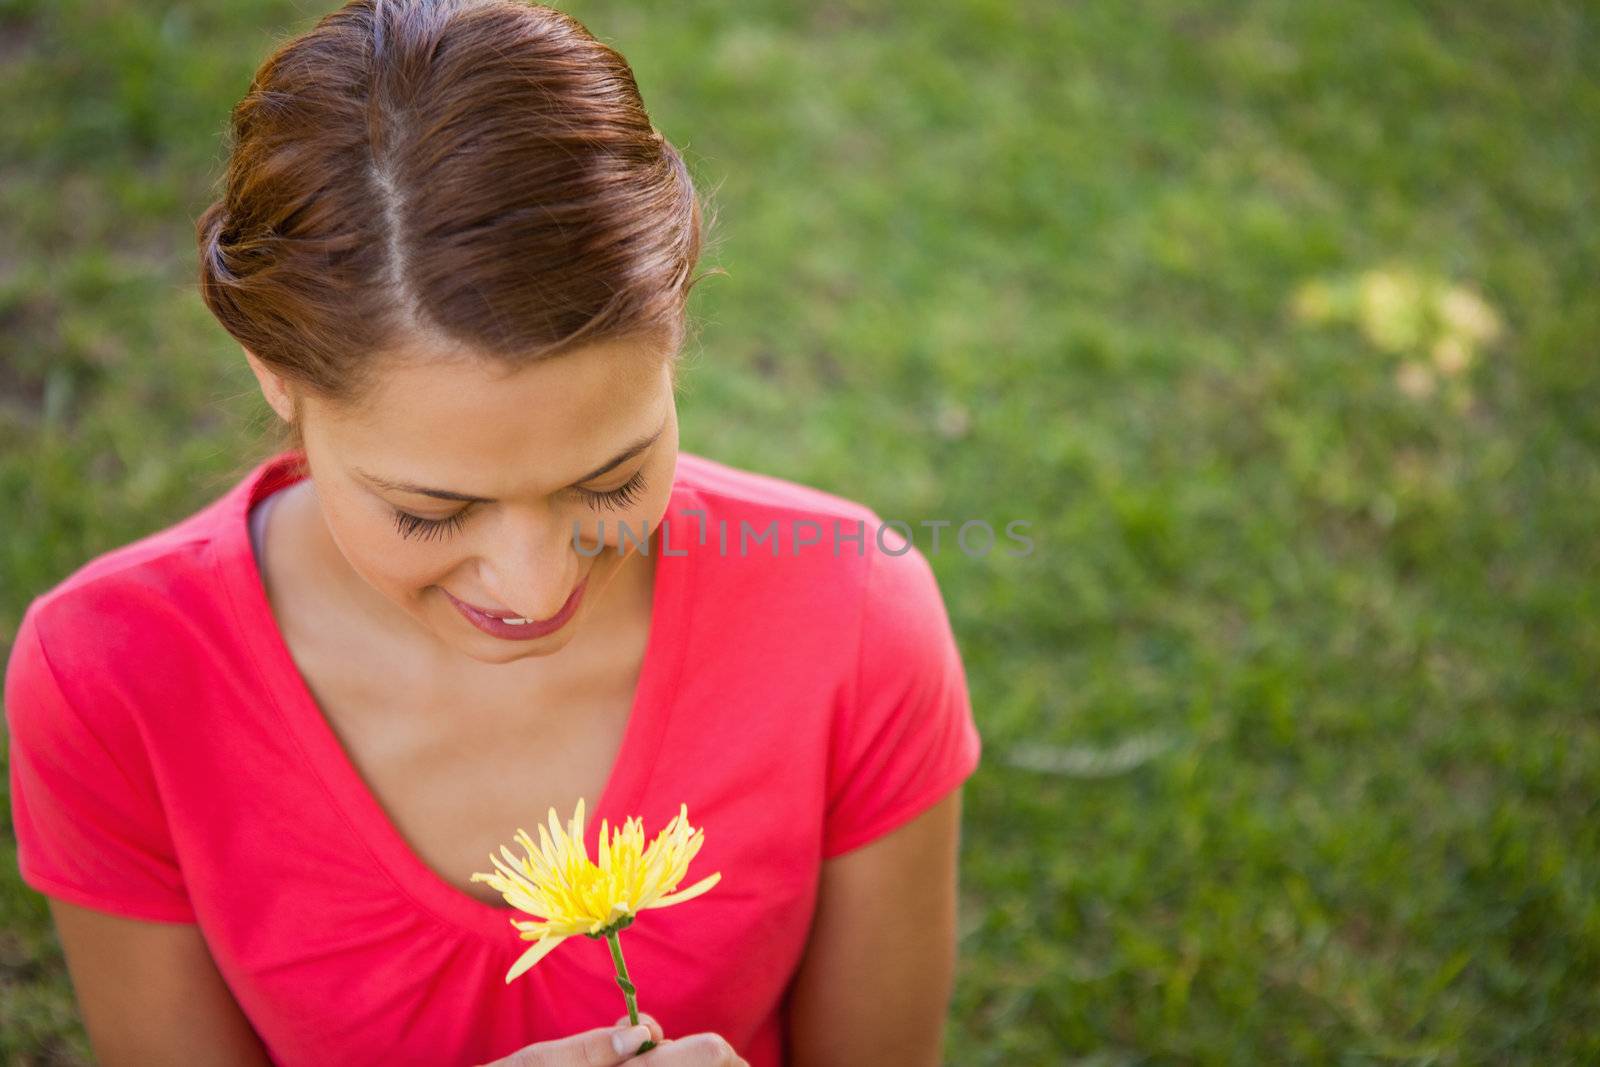 Woman looking downwards at the yellow flower being held in her hand, with grass in the background